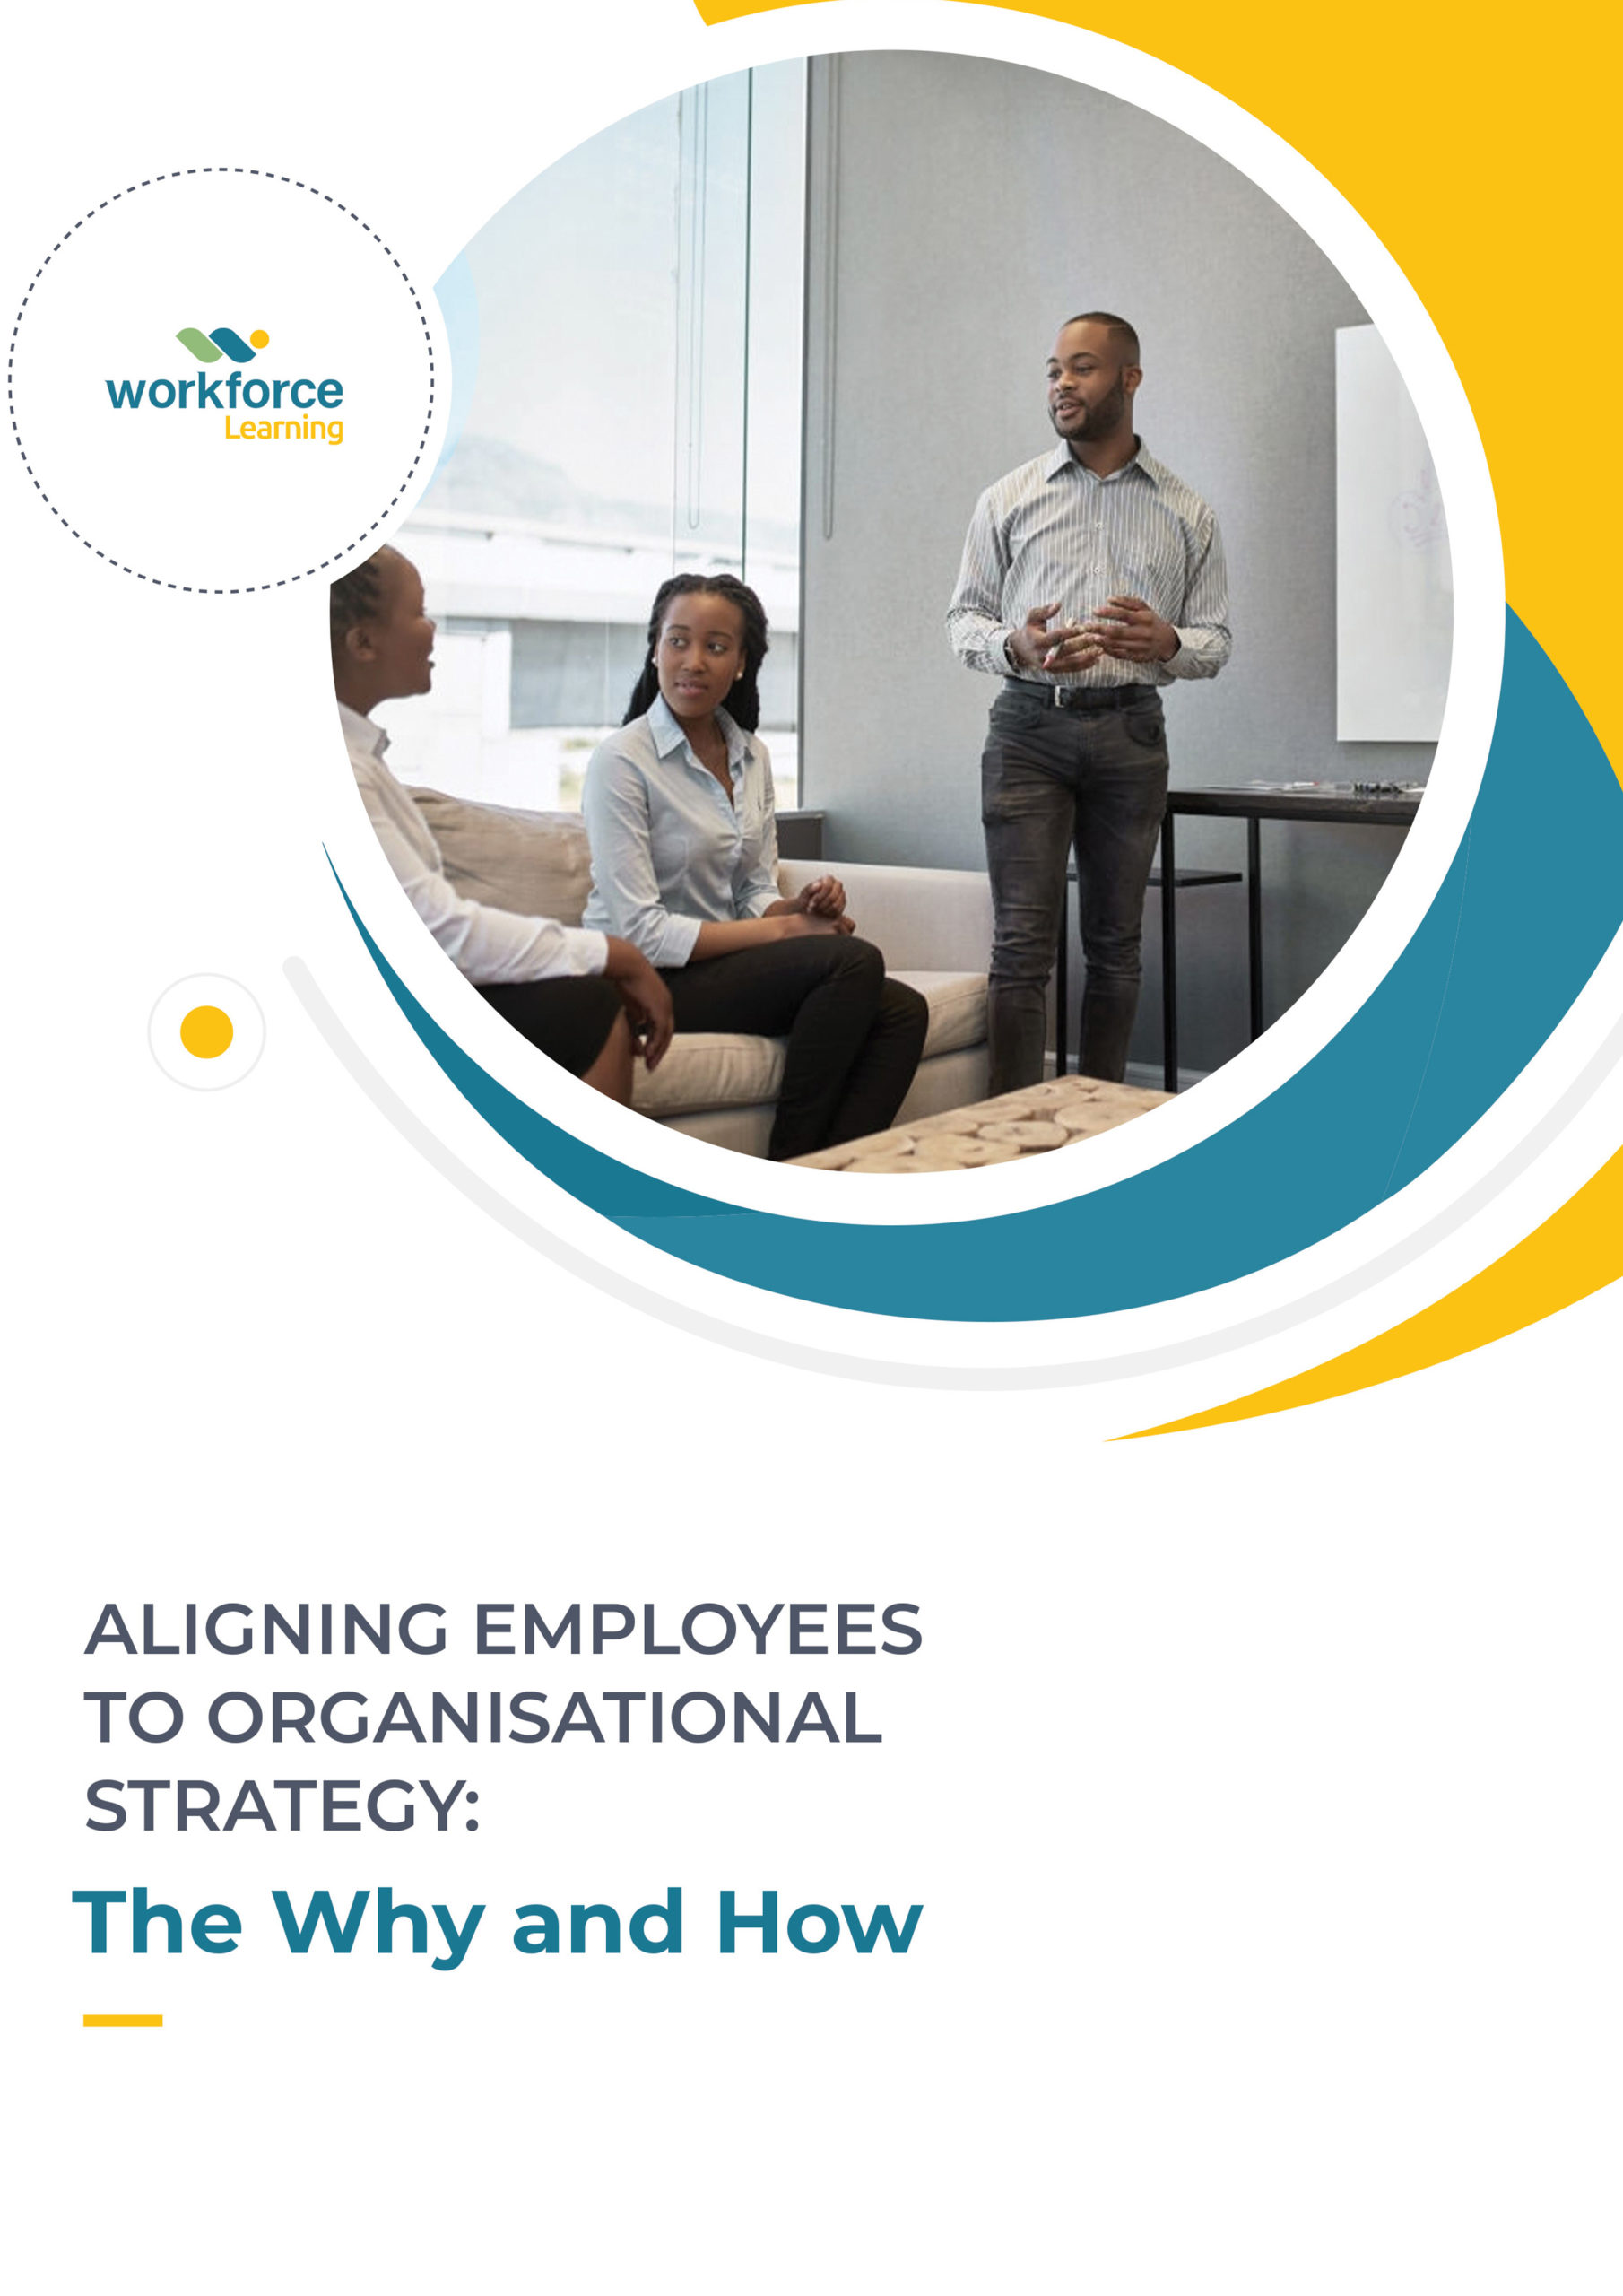 Aligning Employees to Organisational Strategy: The Why and How